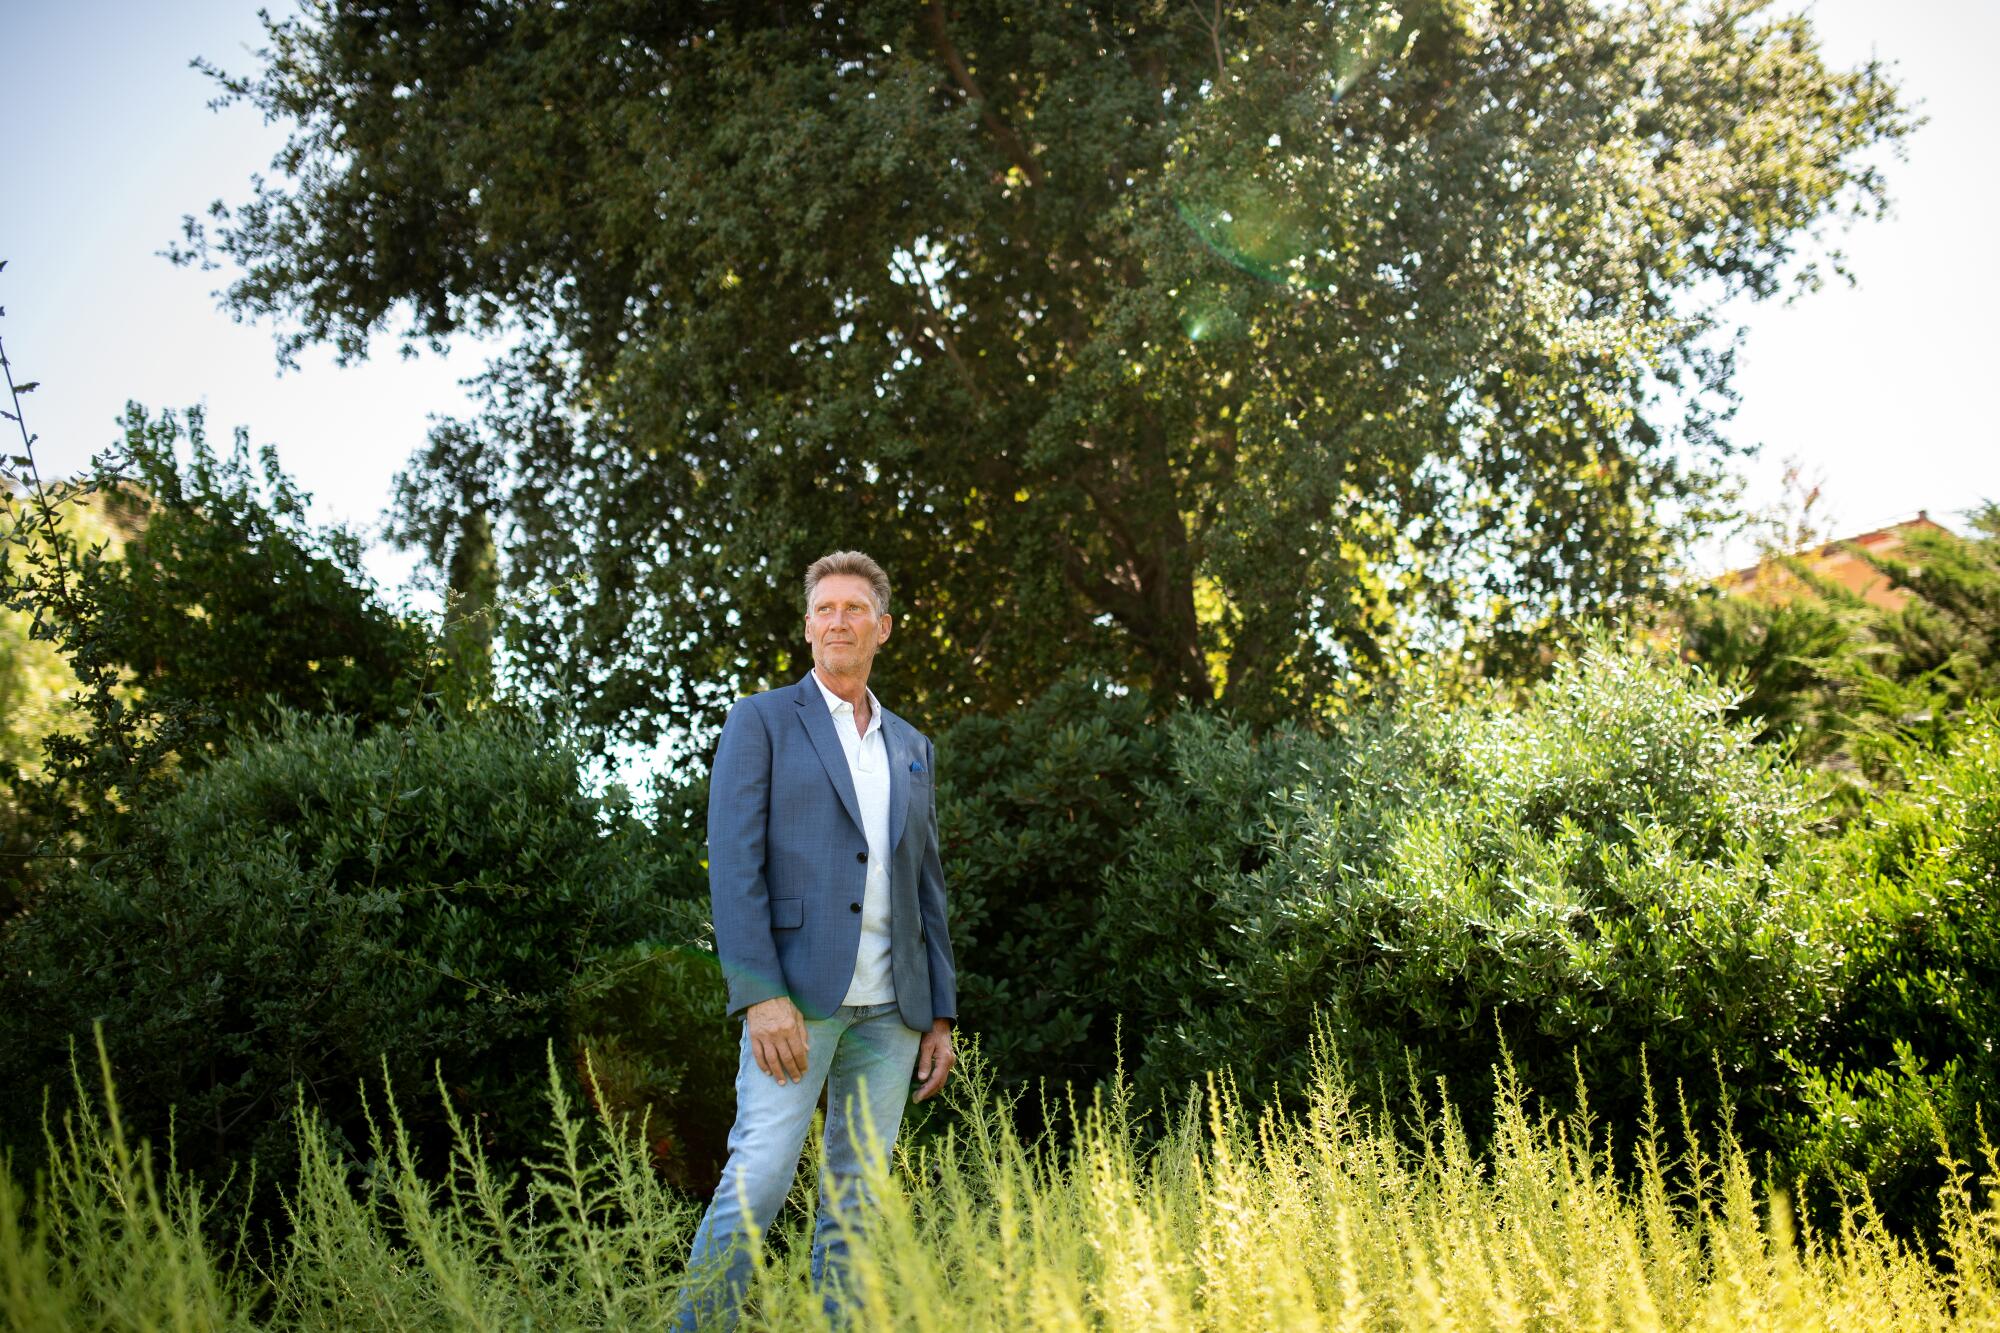 Gerry Turner stands in a field in front of tree.